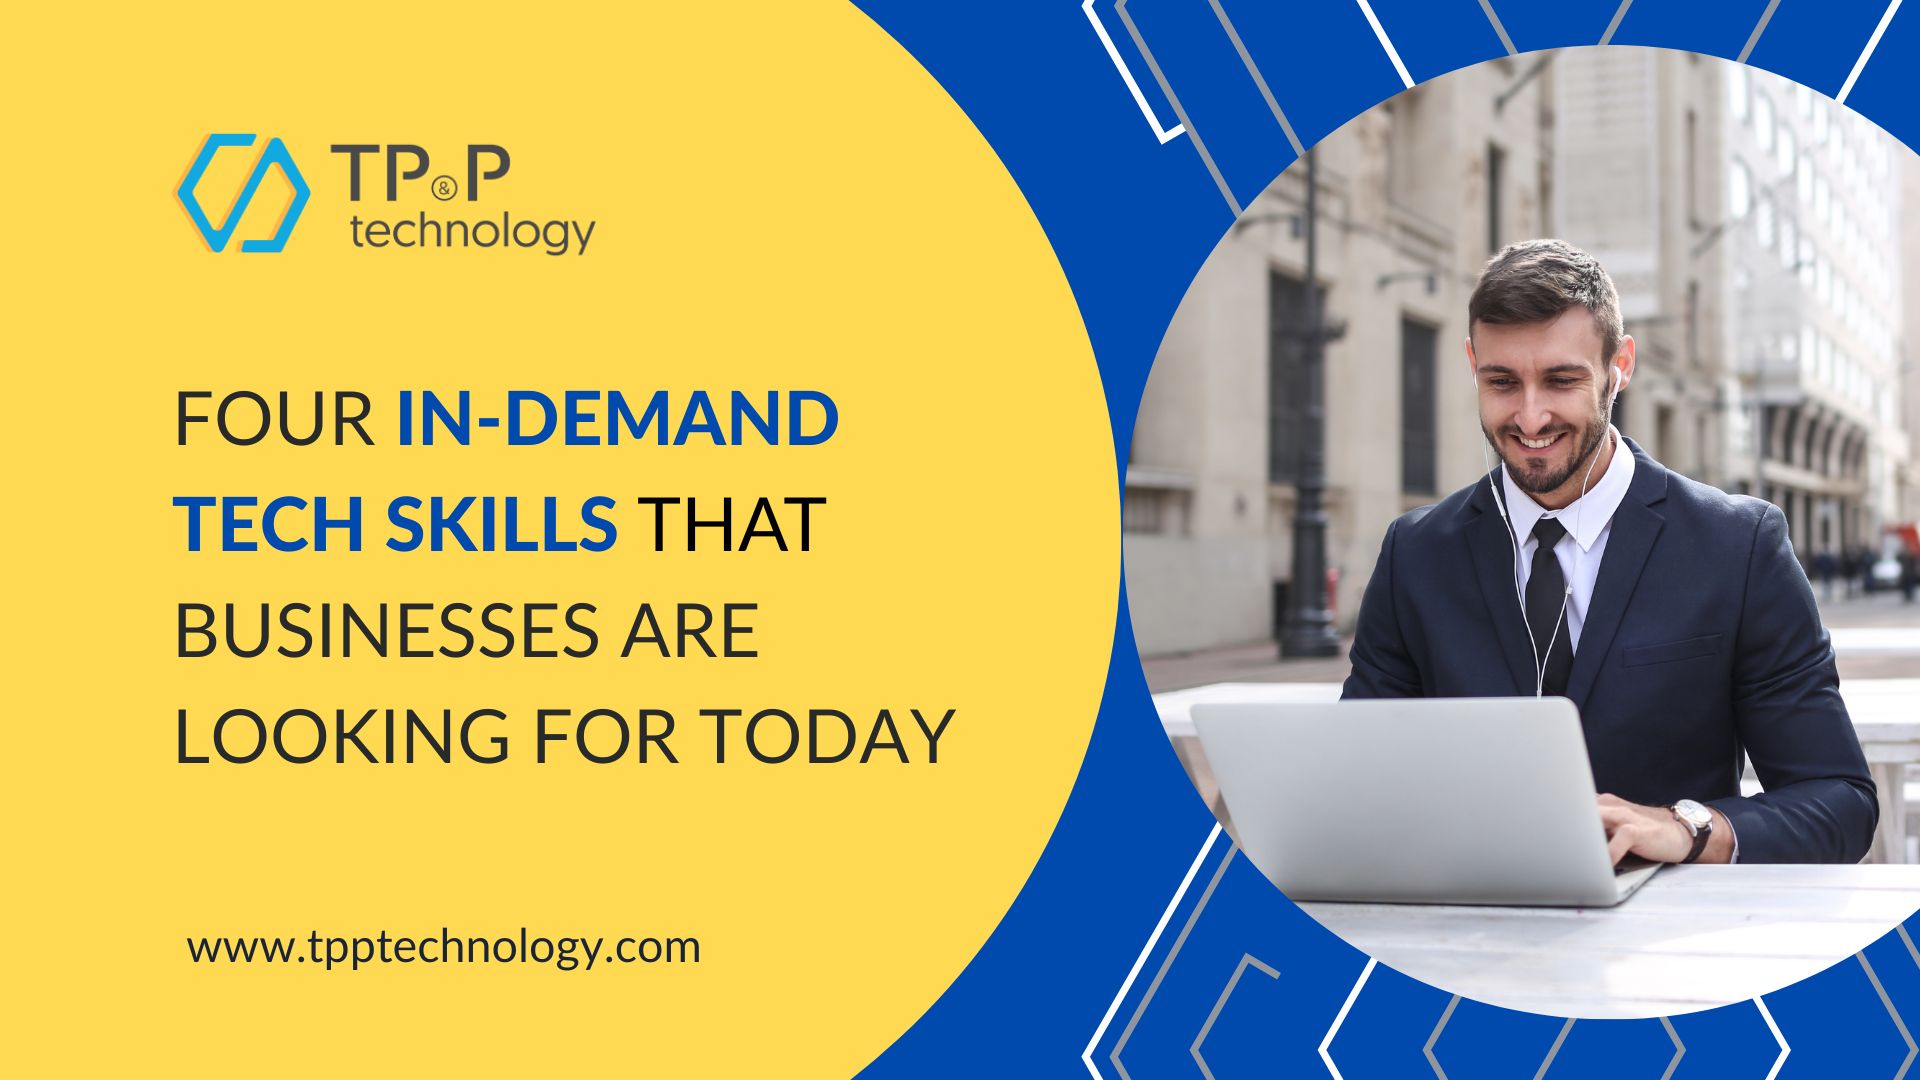 What Technology Skills Are In Demand